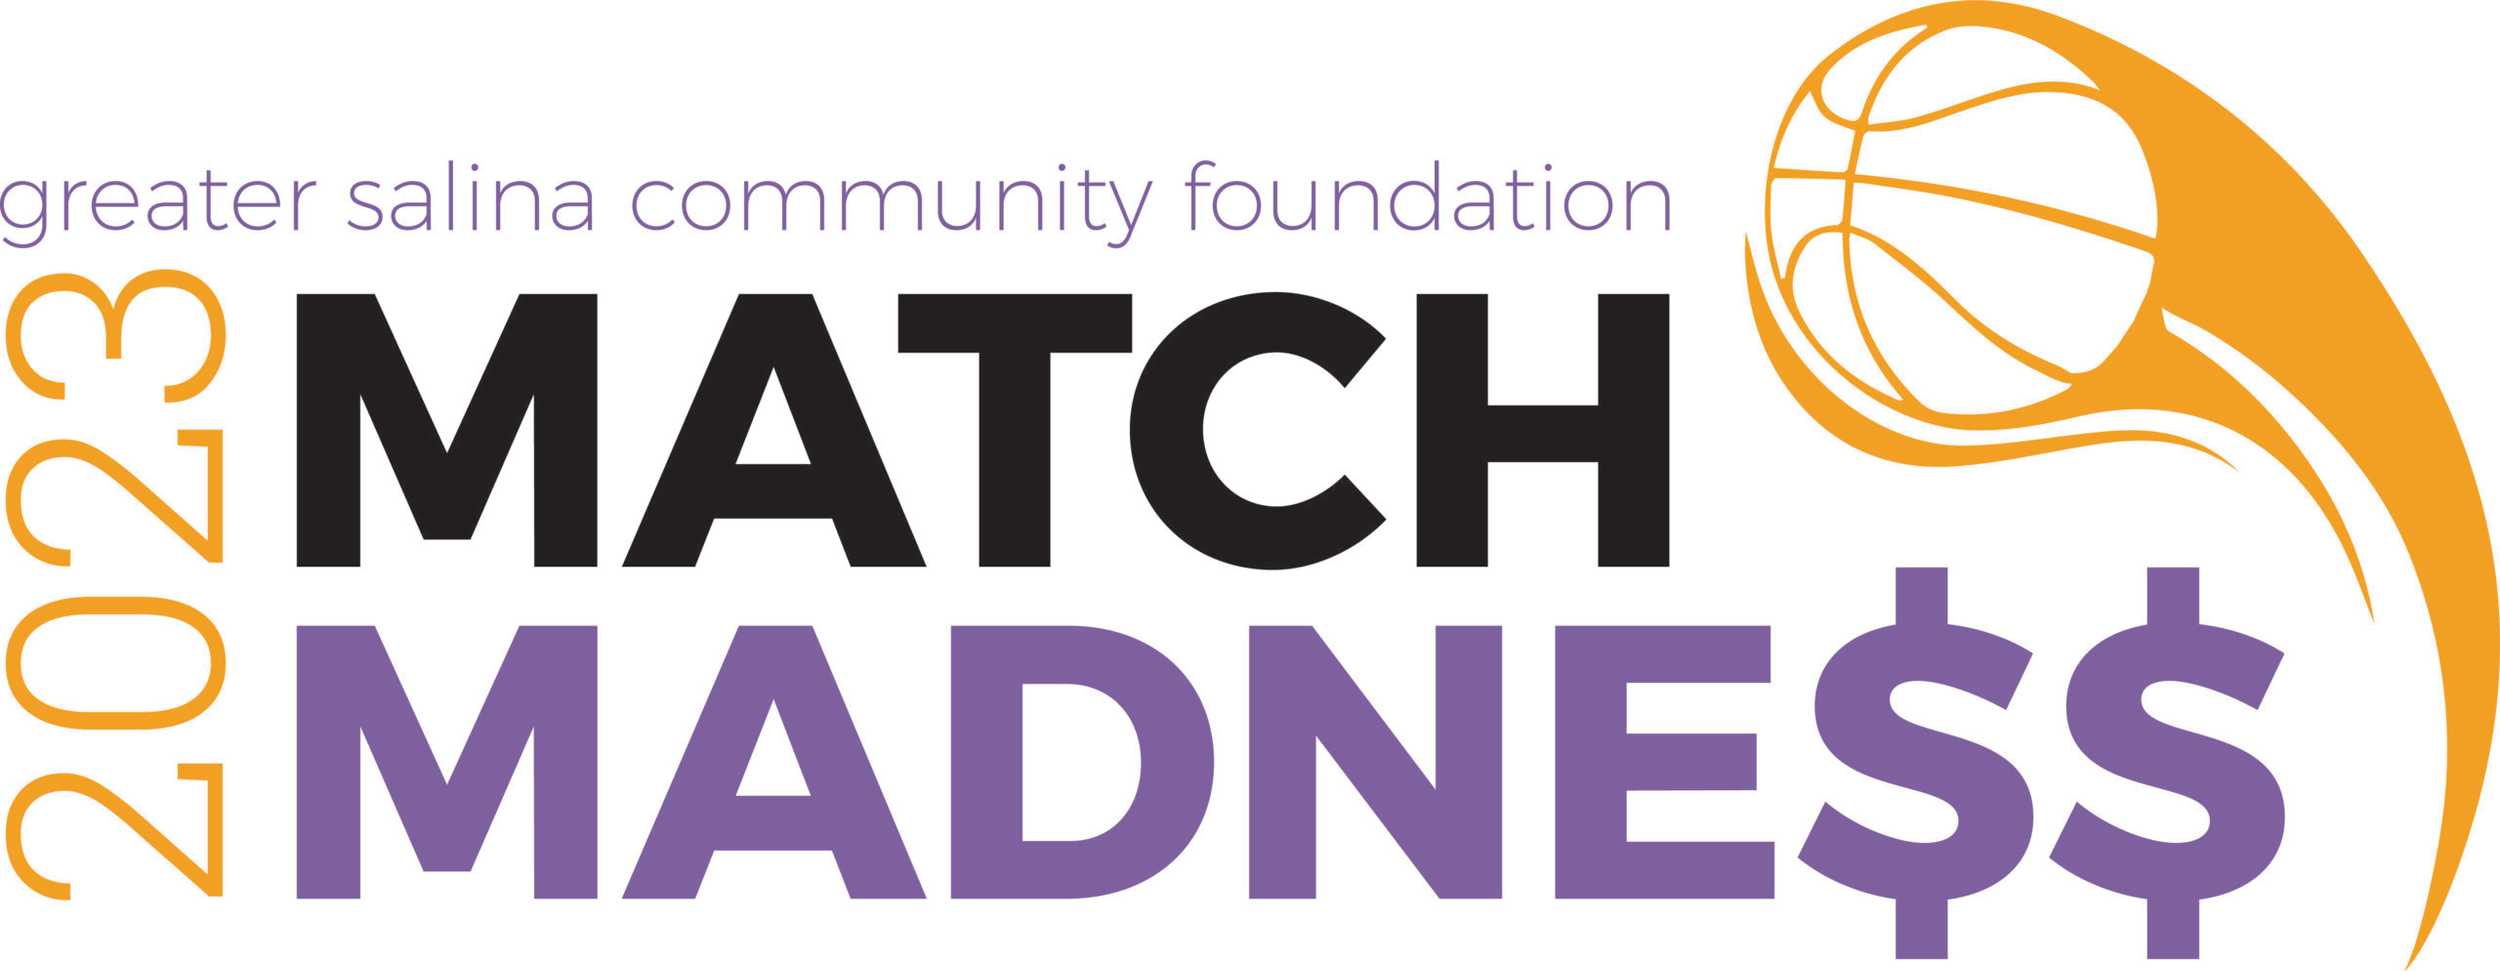 Logo for the Greater Salina Community Foundation's 2023 Match Madness event. The words "Match Madness" are prominently displayed in black and purple, respectively. An orange basketball graphic is incorporated into the design.